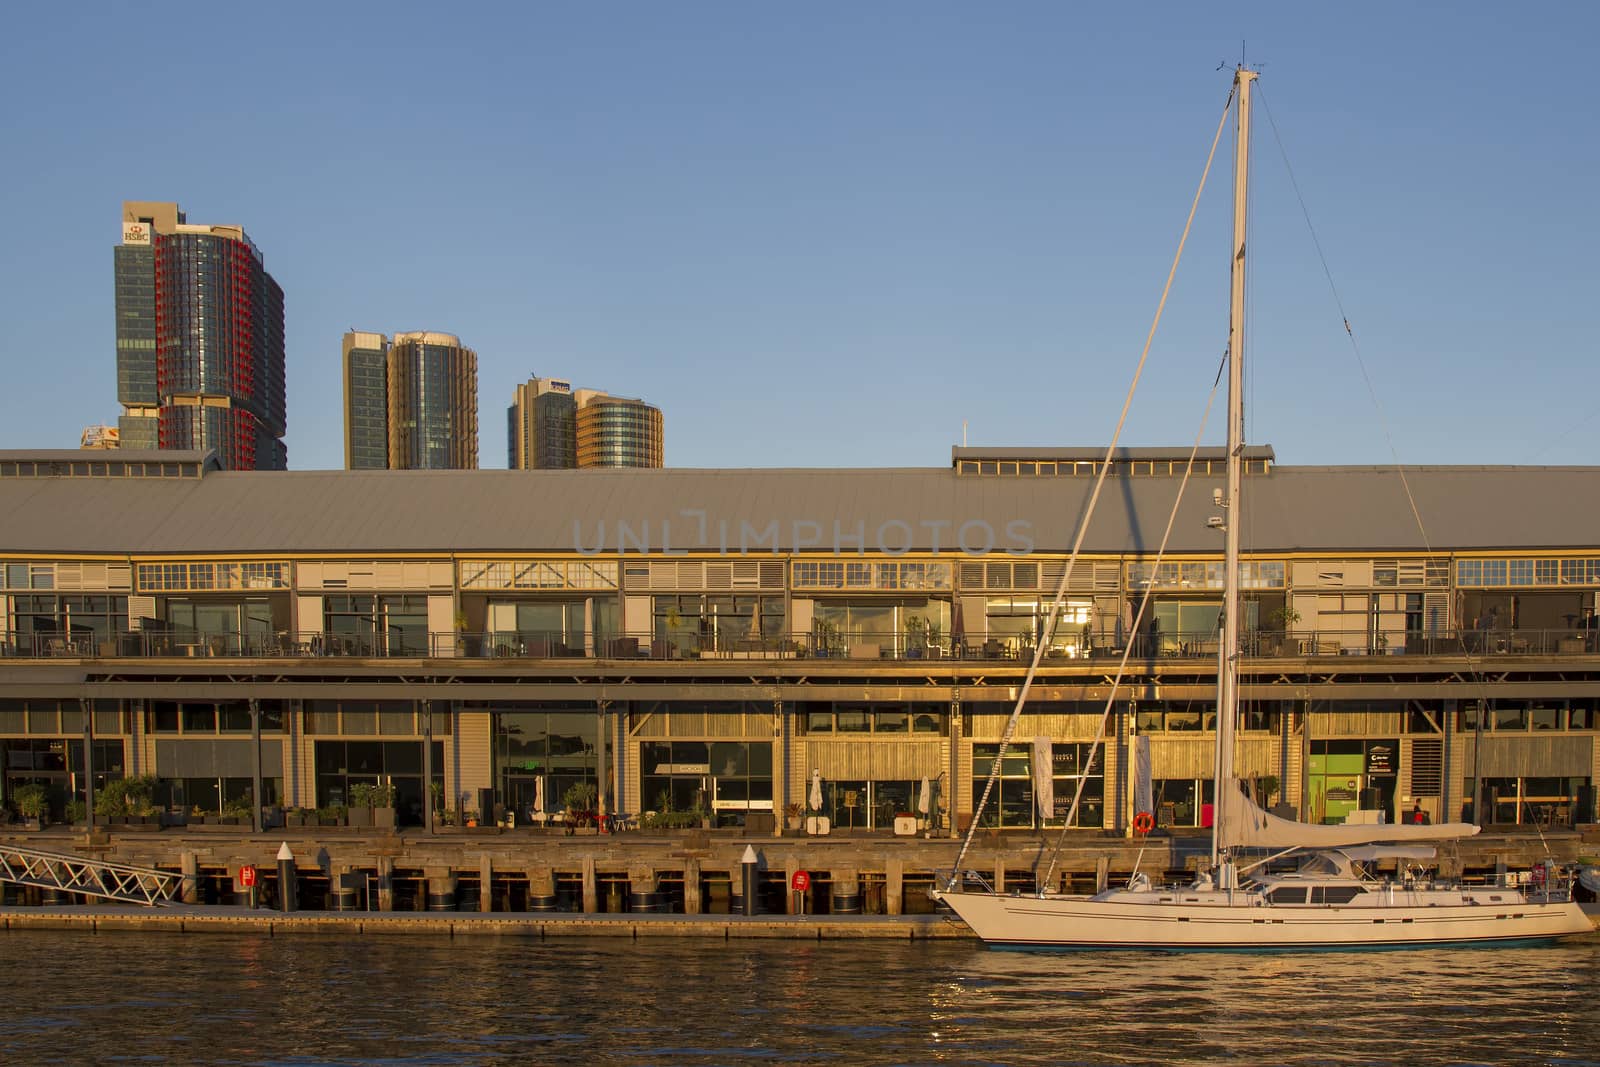 A sailboat infront of the historical Jones Bay Wharf office and restaurant building in Sydney Australia with the CBD skyscrapers in the background.